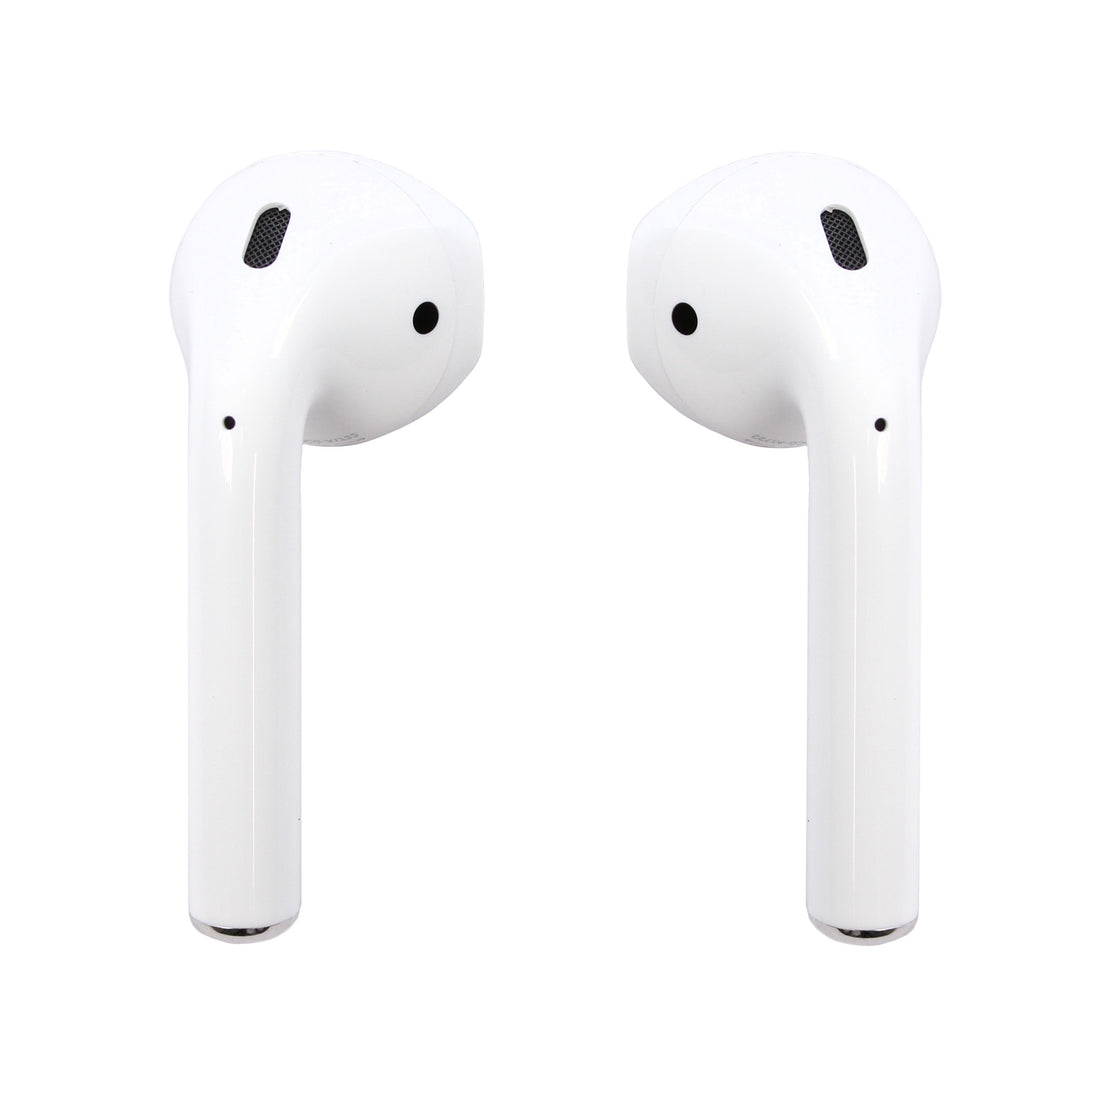 Apple AirPods Bluetooth Wireless Earphones w/ MFI Cable - White (Refurbished)